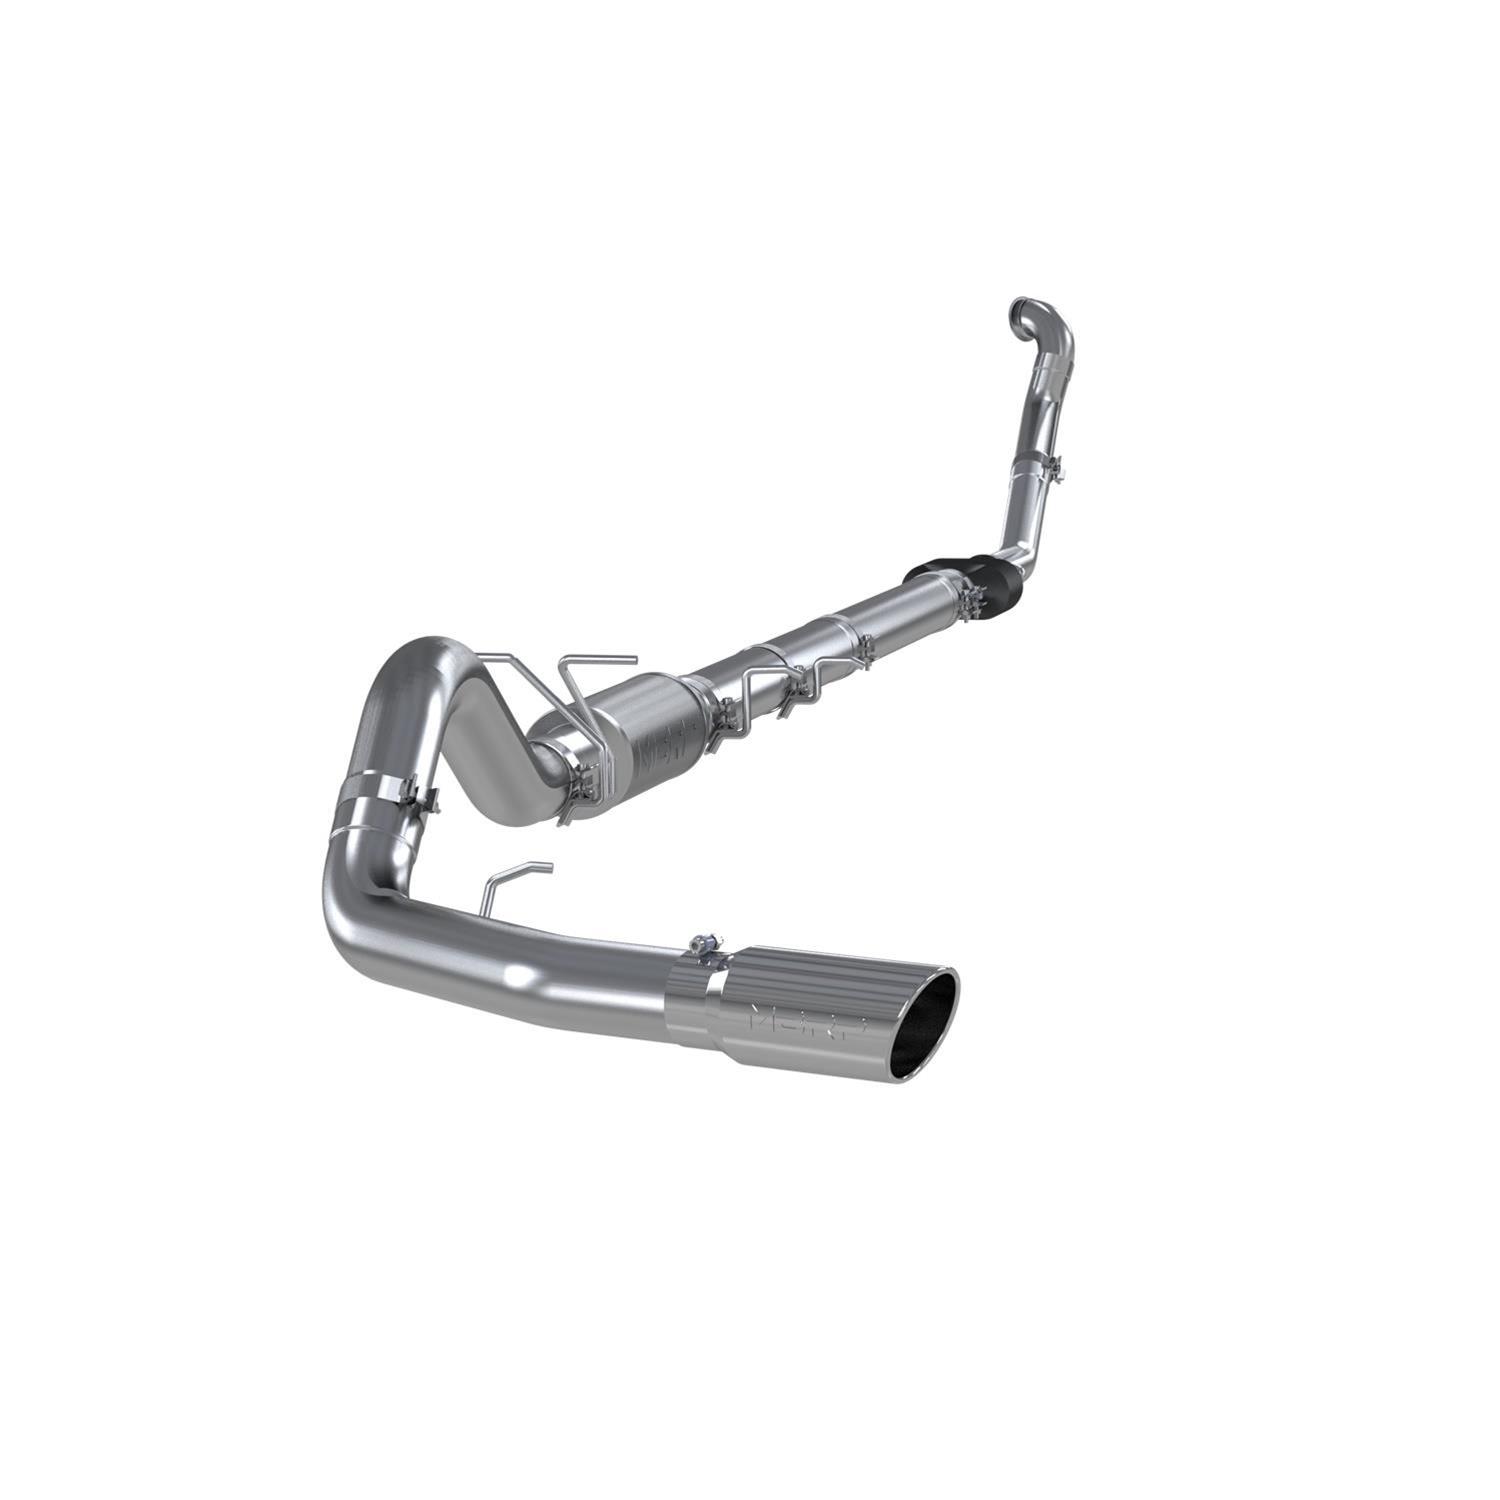 1996 FORD F 250 MBRP Performance Exhaust S6218409 MBRP XP Series